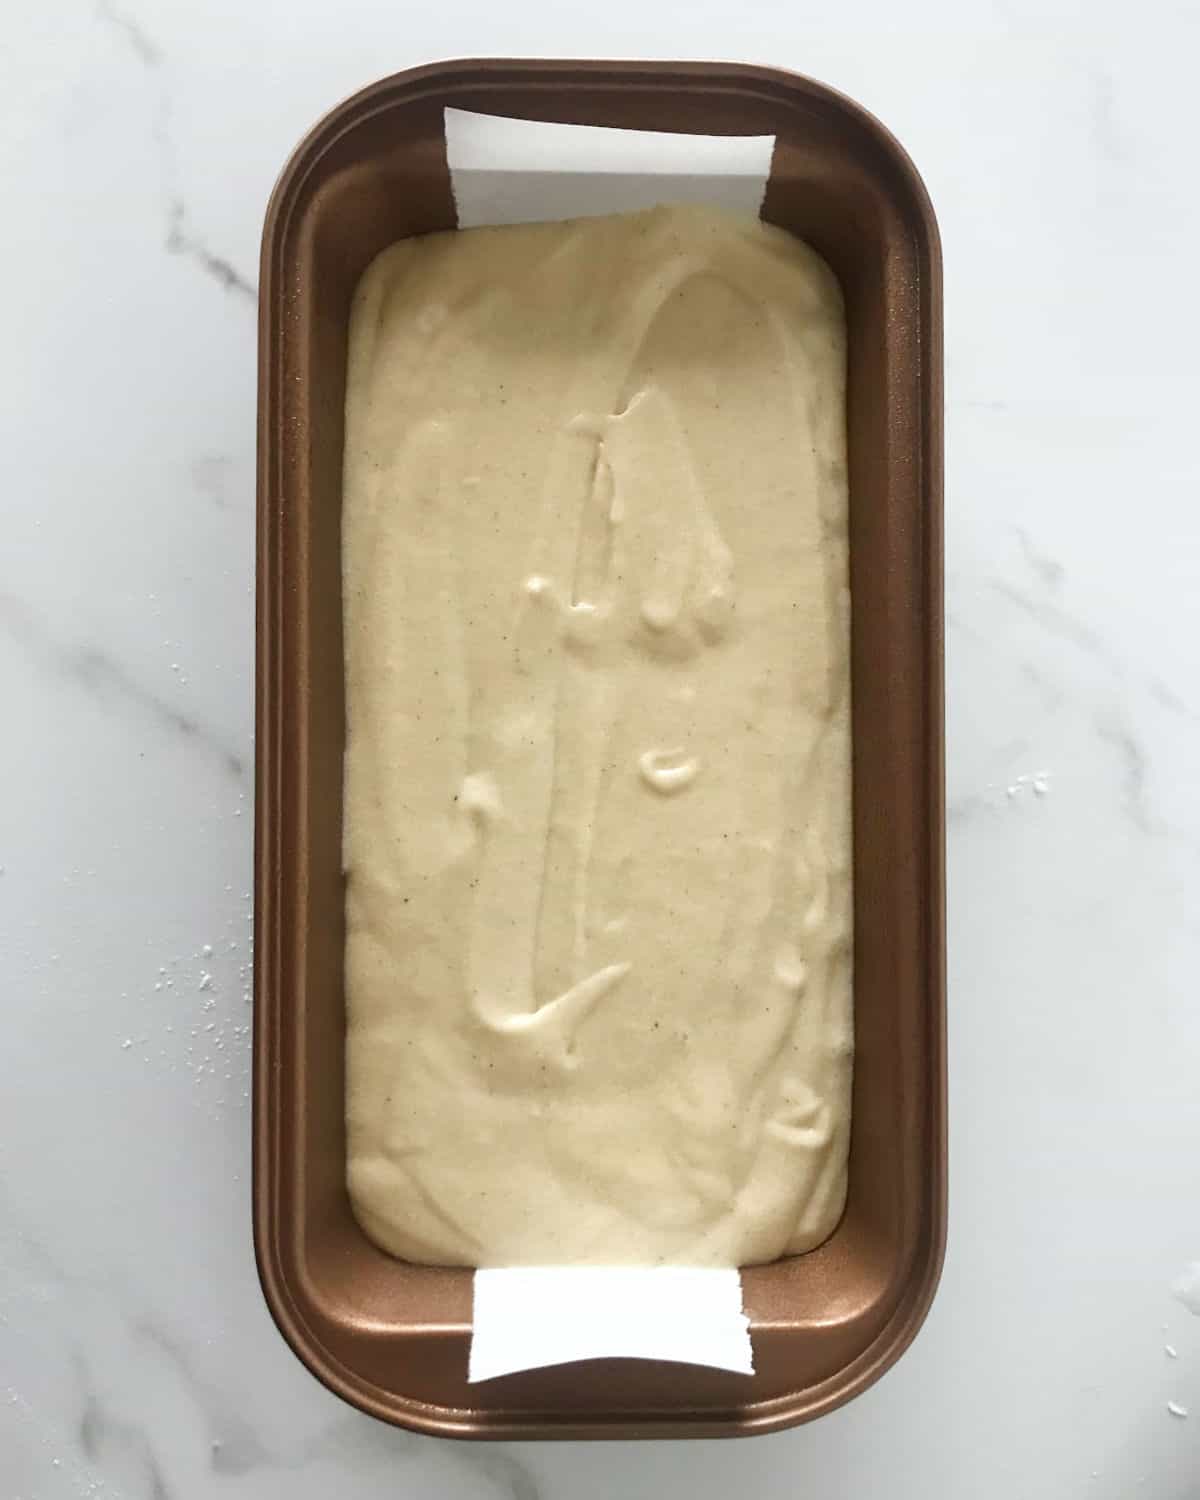 Metal loaf pan with ginger cake batter on a white marble surface.